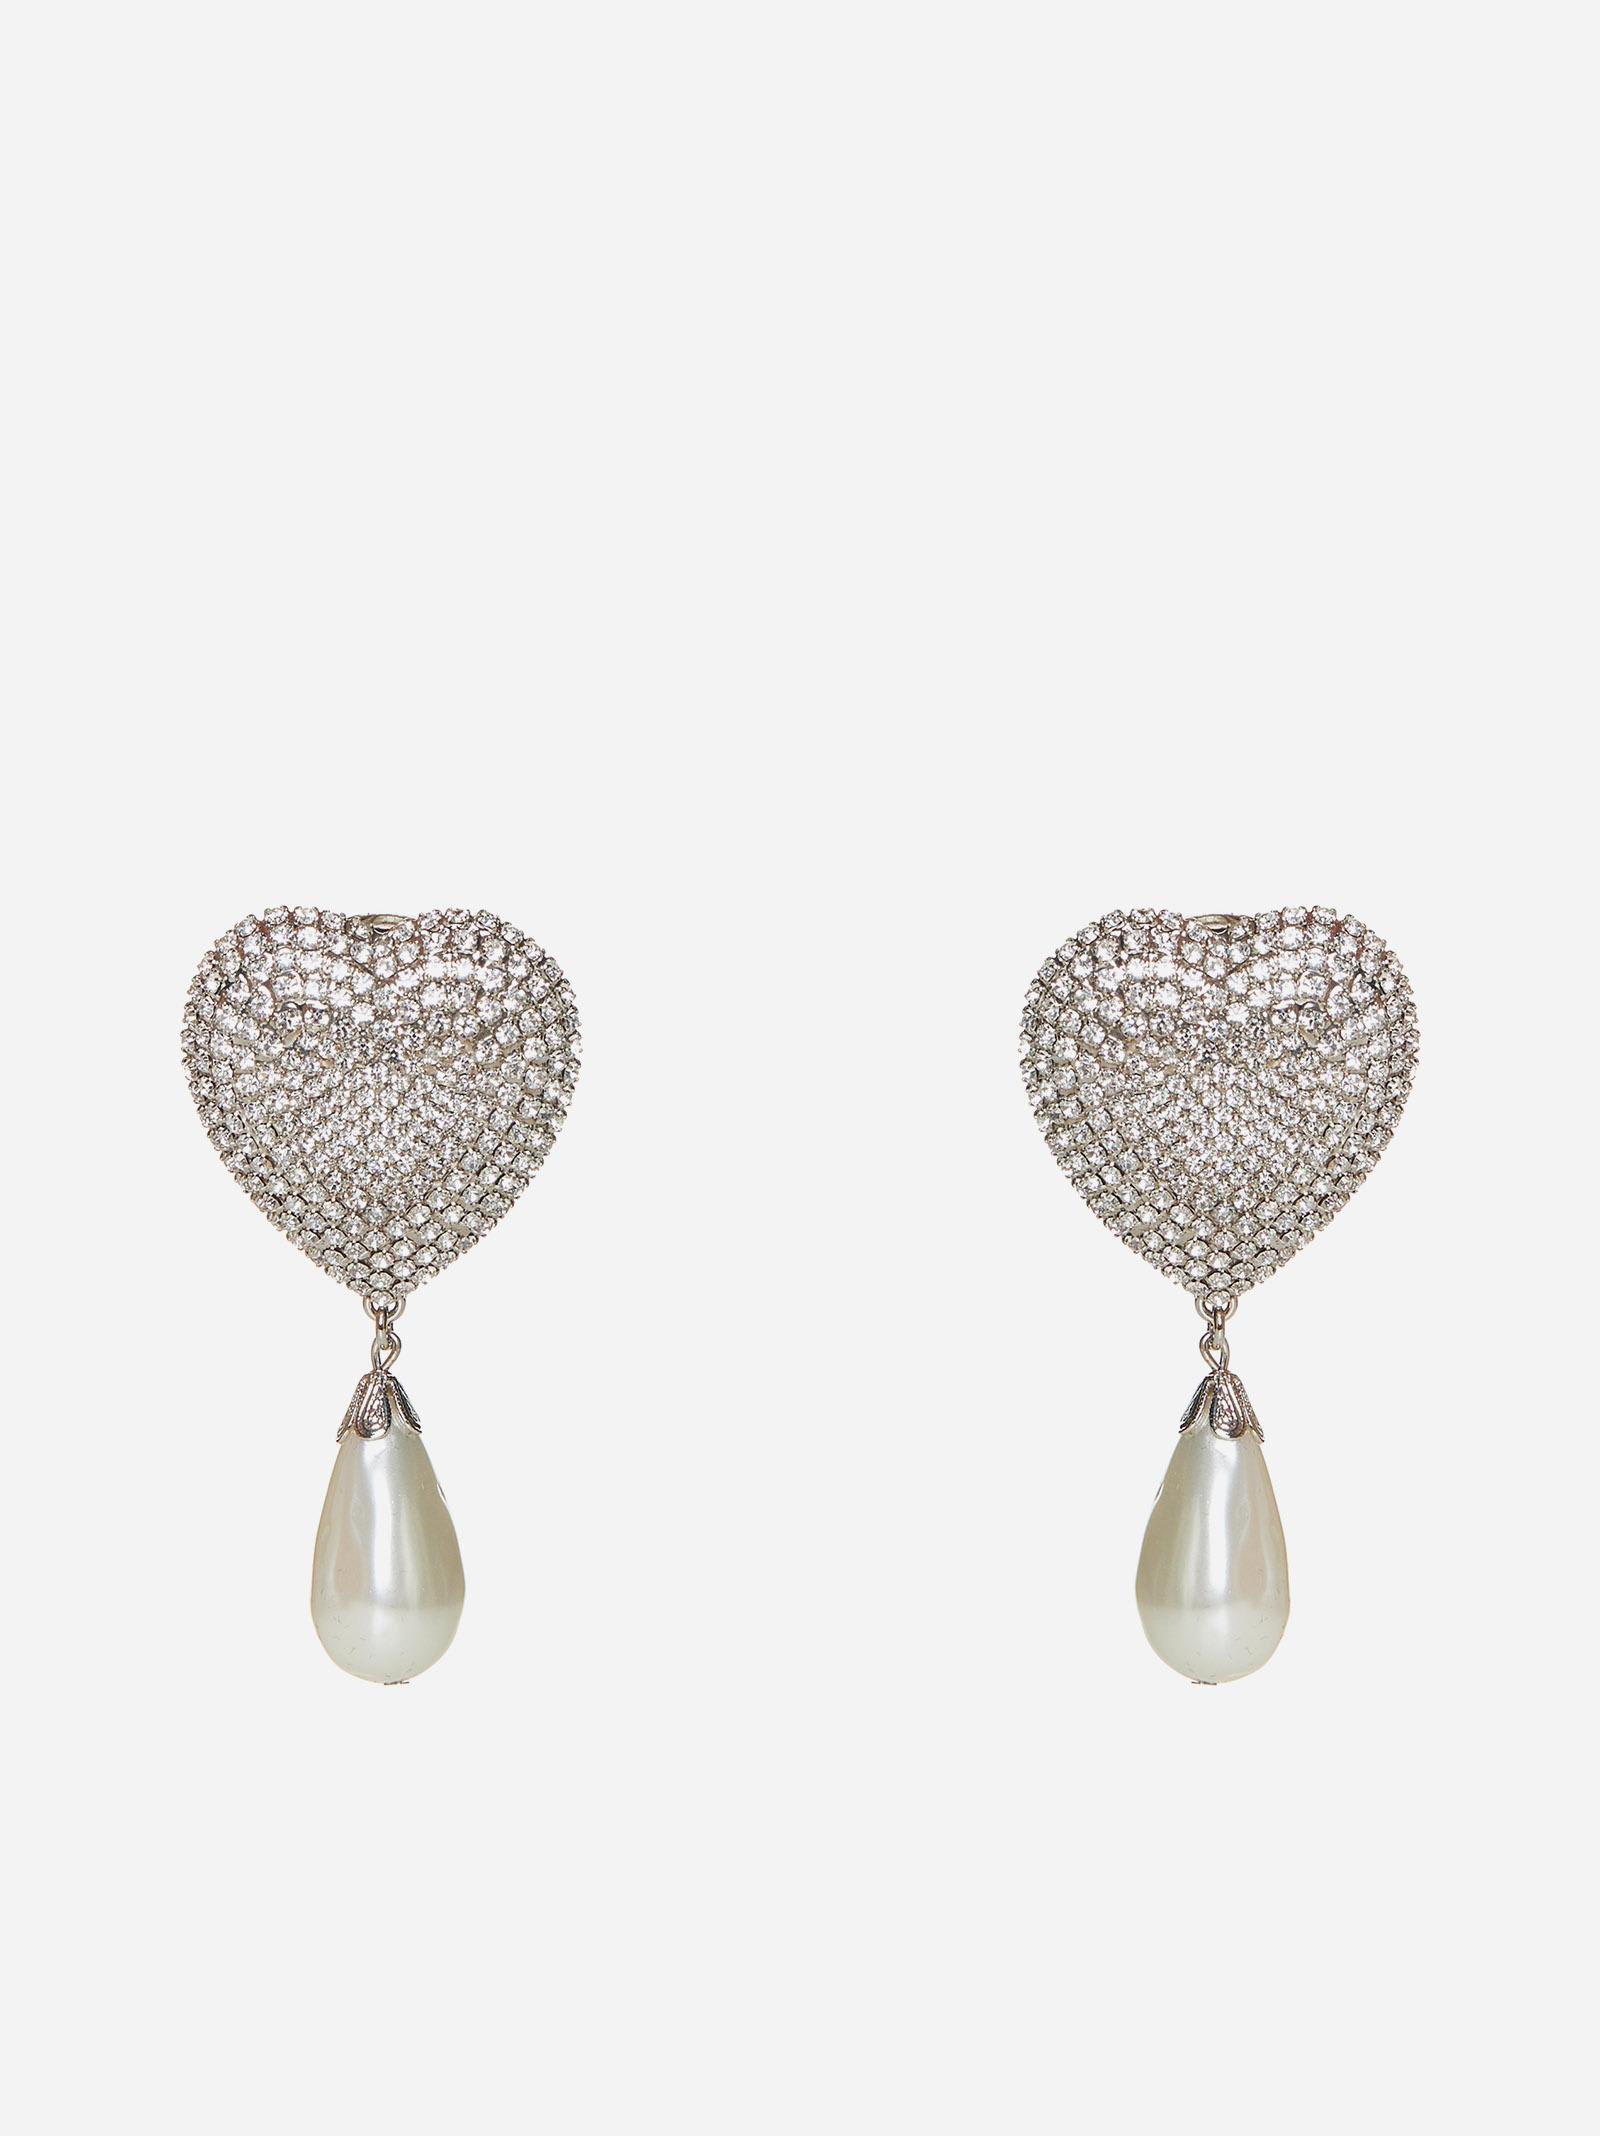 Heart Crystals And Pearl Earrings